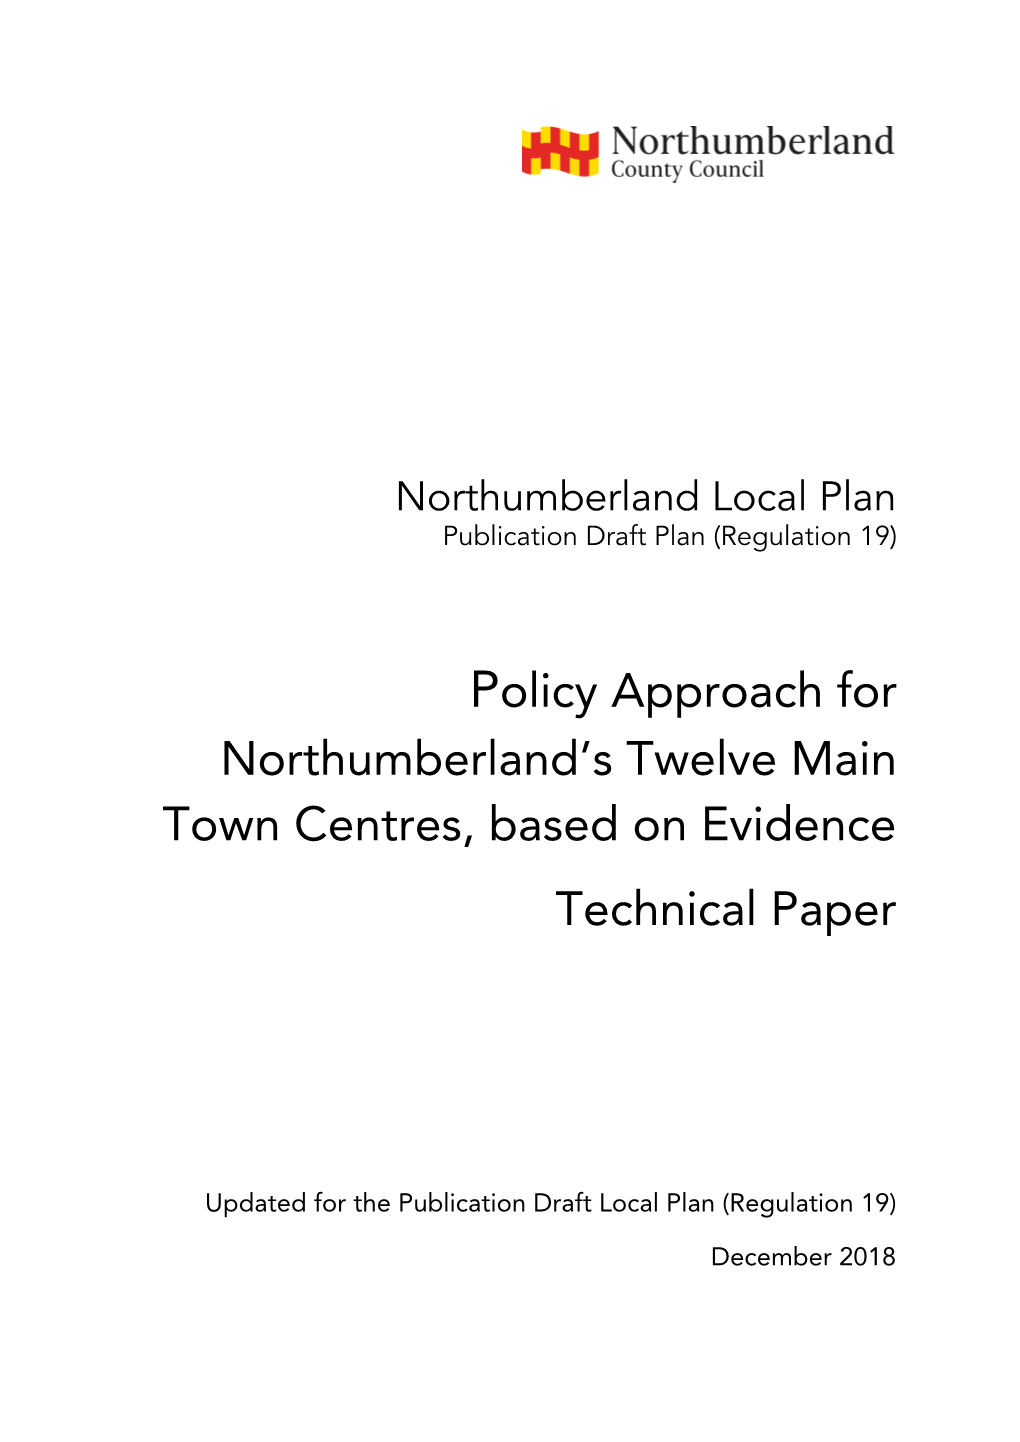 Policy Approach on Town Centres Technical Paper